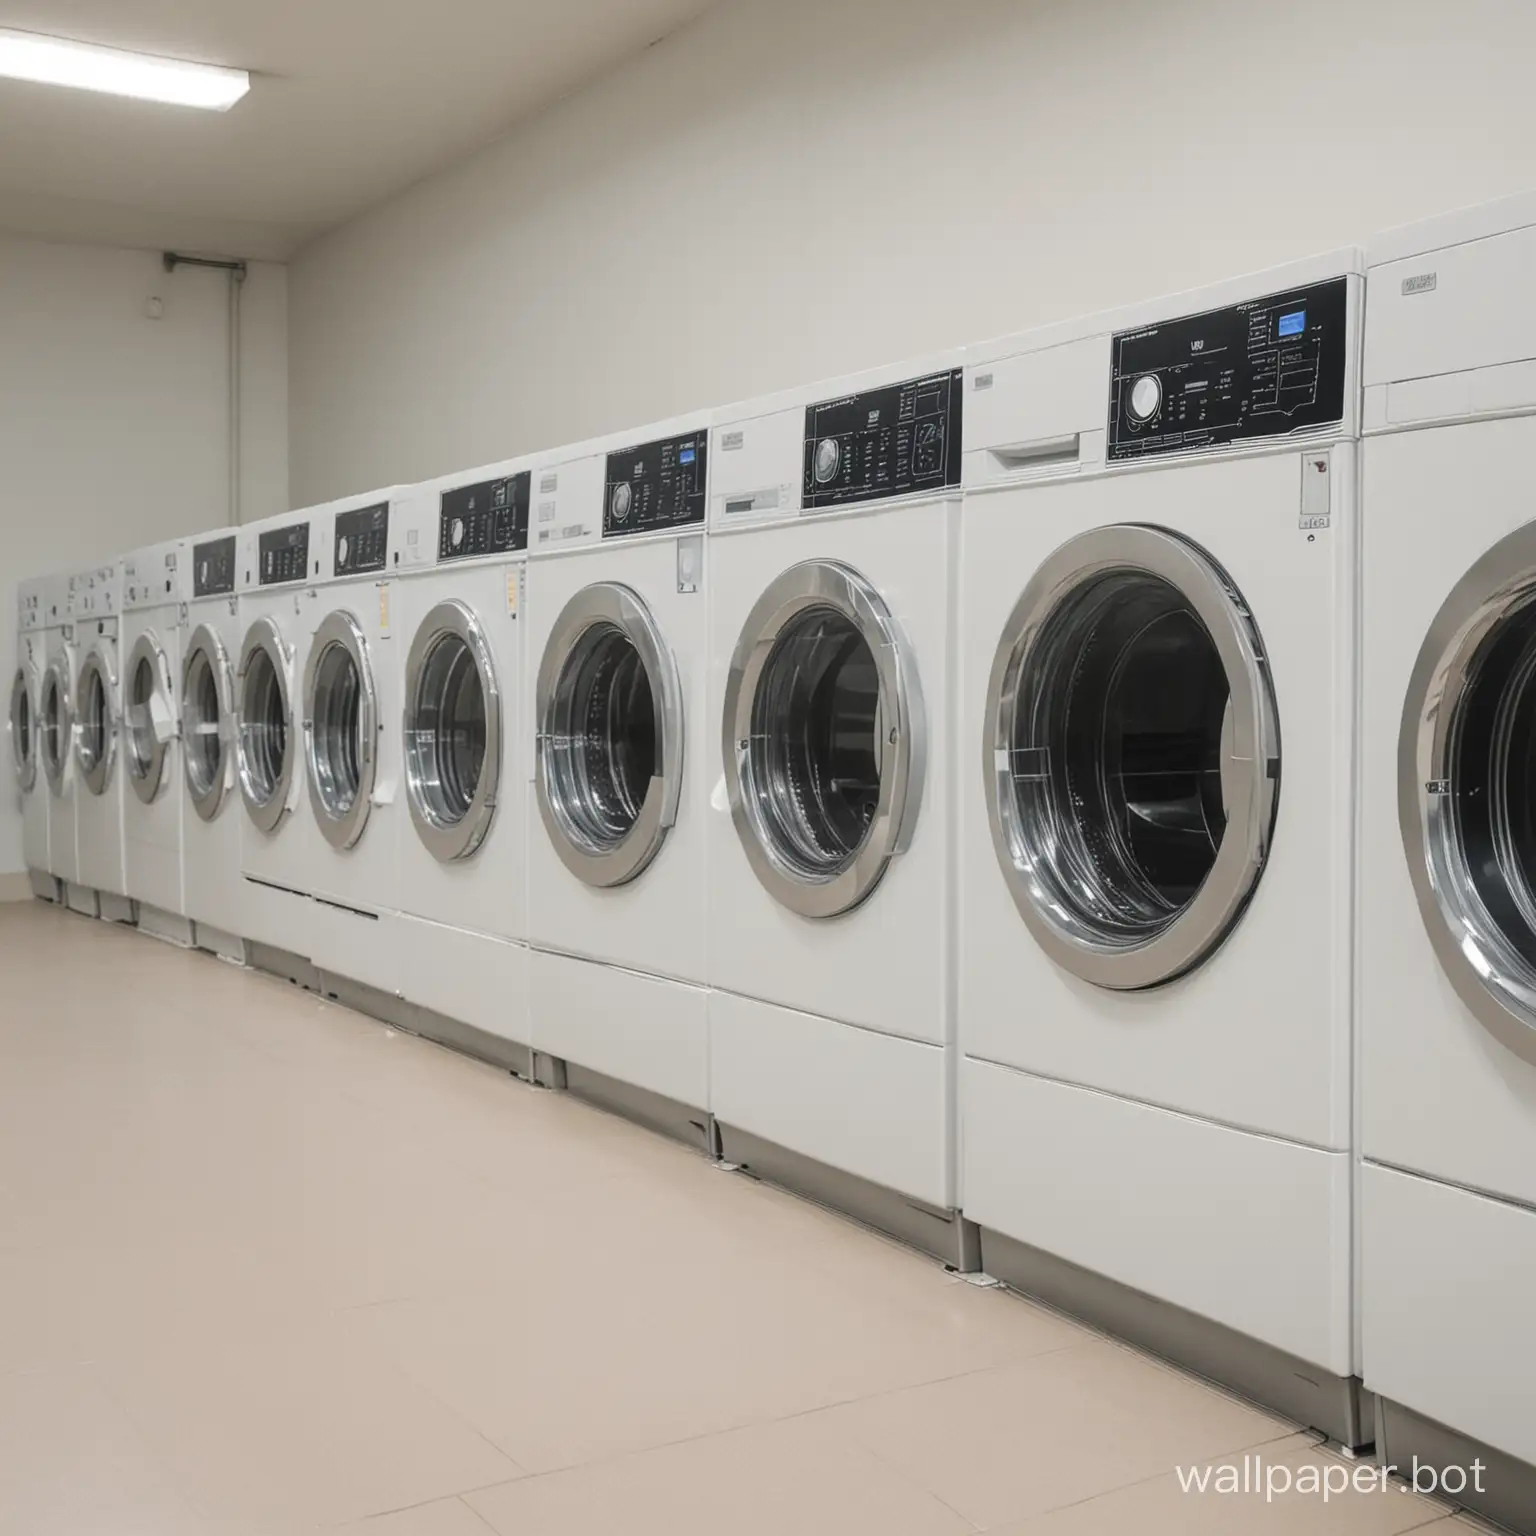 A row of washing machines in the laundry